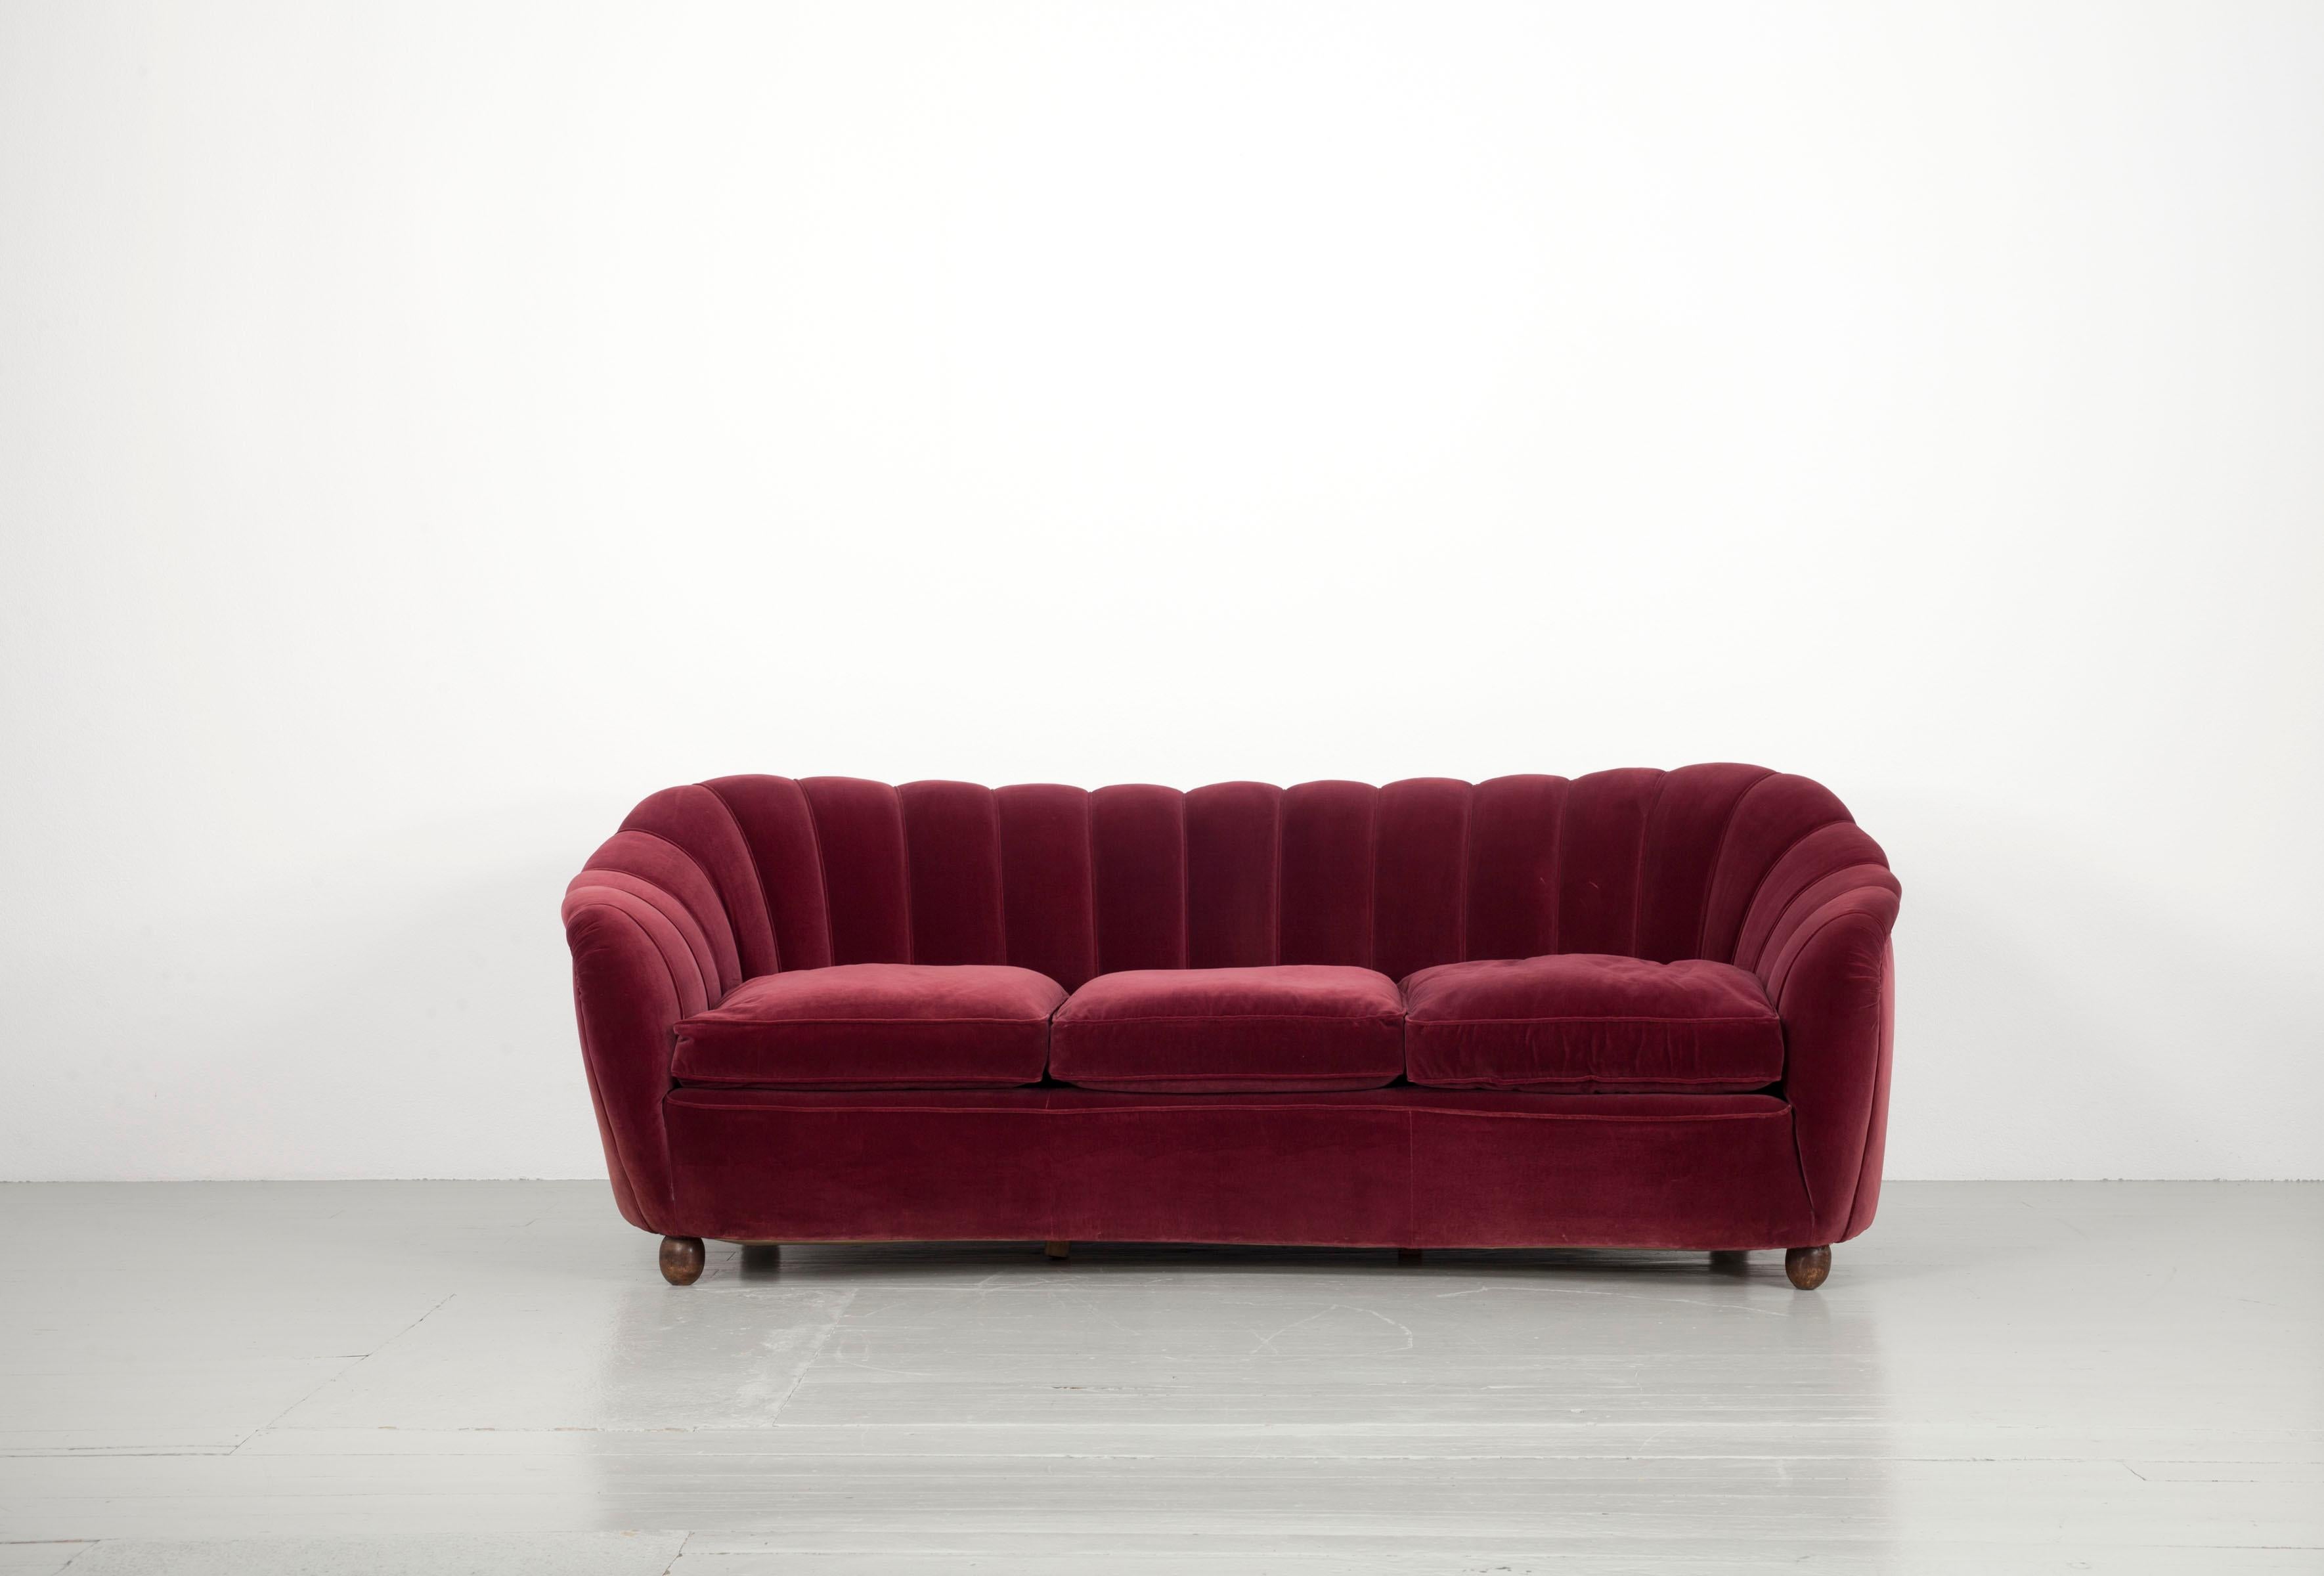 Italian Set of a Massive Sofa and Two Armchairs in Dark Red Velvet Cover, 1940s For Sale 4